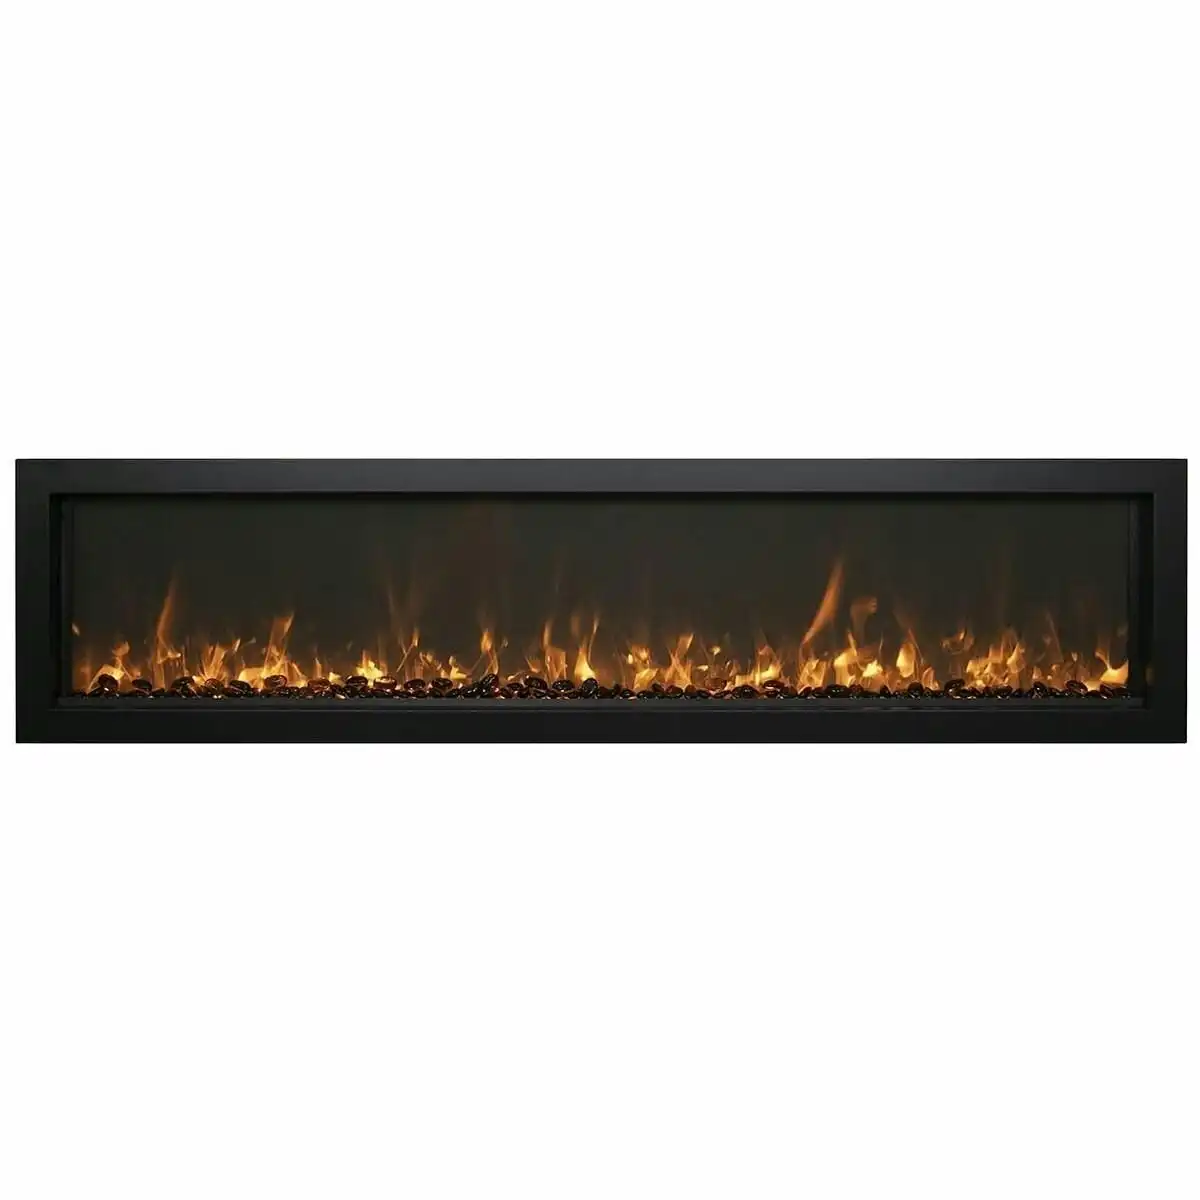 Remii 45 Inch Extra Slim Indoor Built In Electric Fireplace with Black Steel Surround